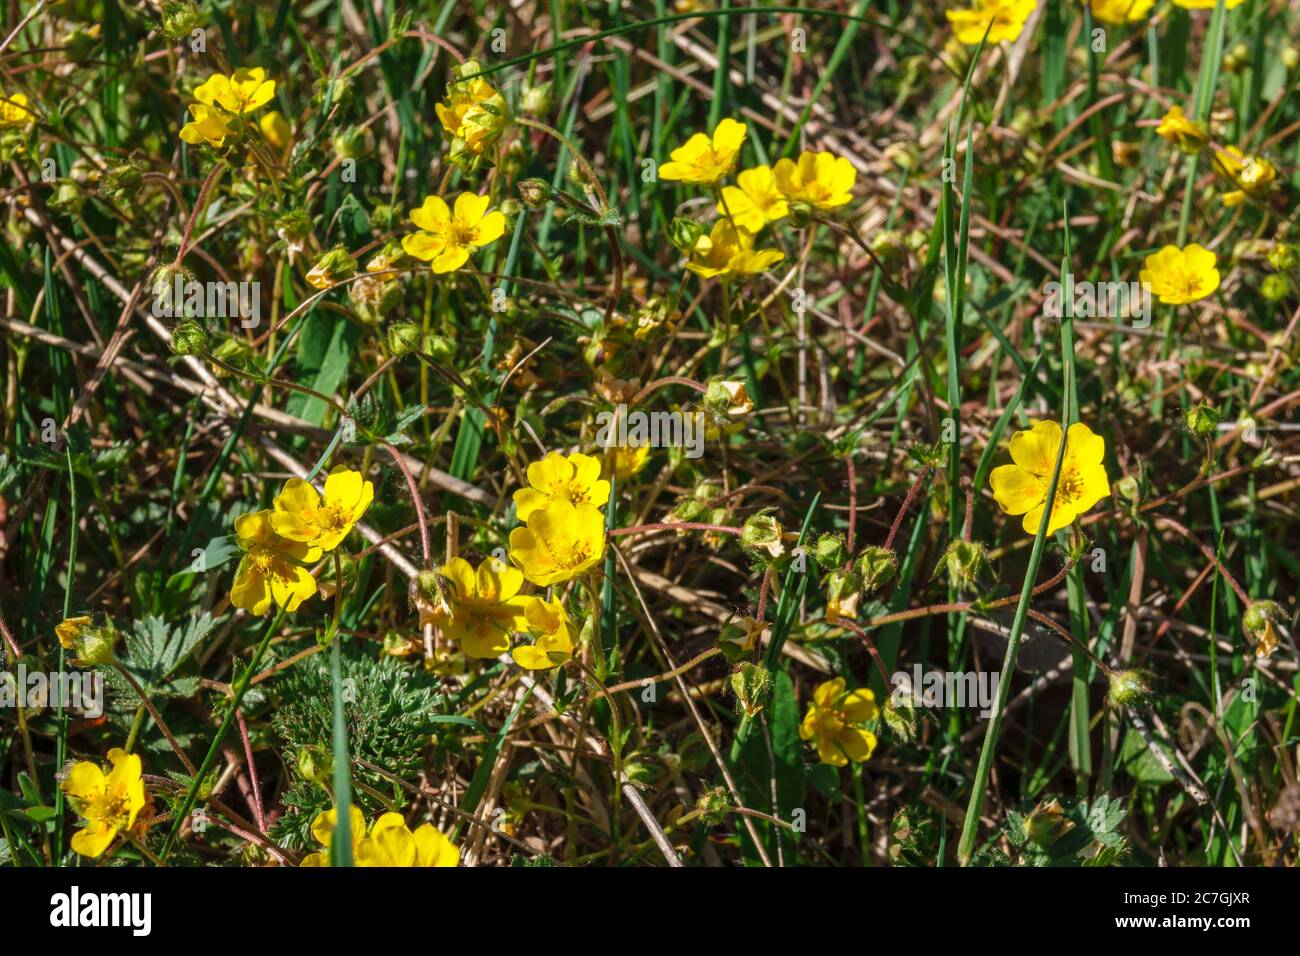 Flowering Alpine cinquefoil flowers on a meadow Stock Photo